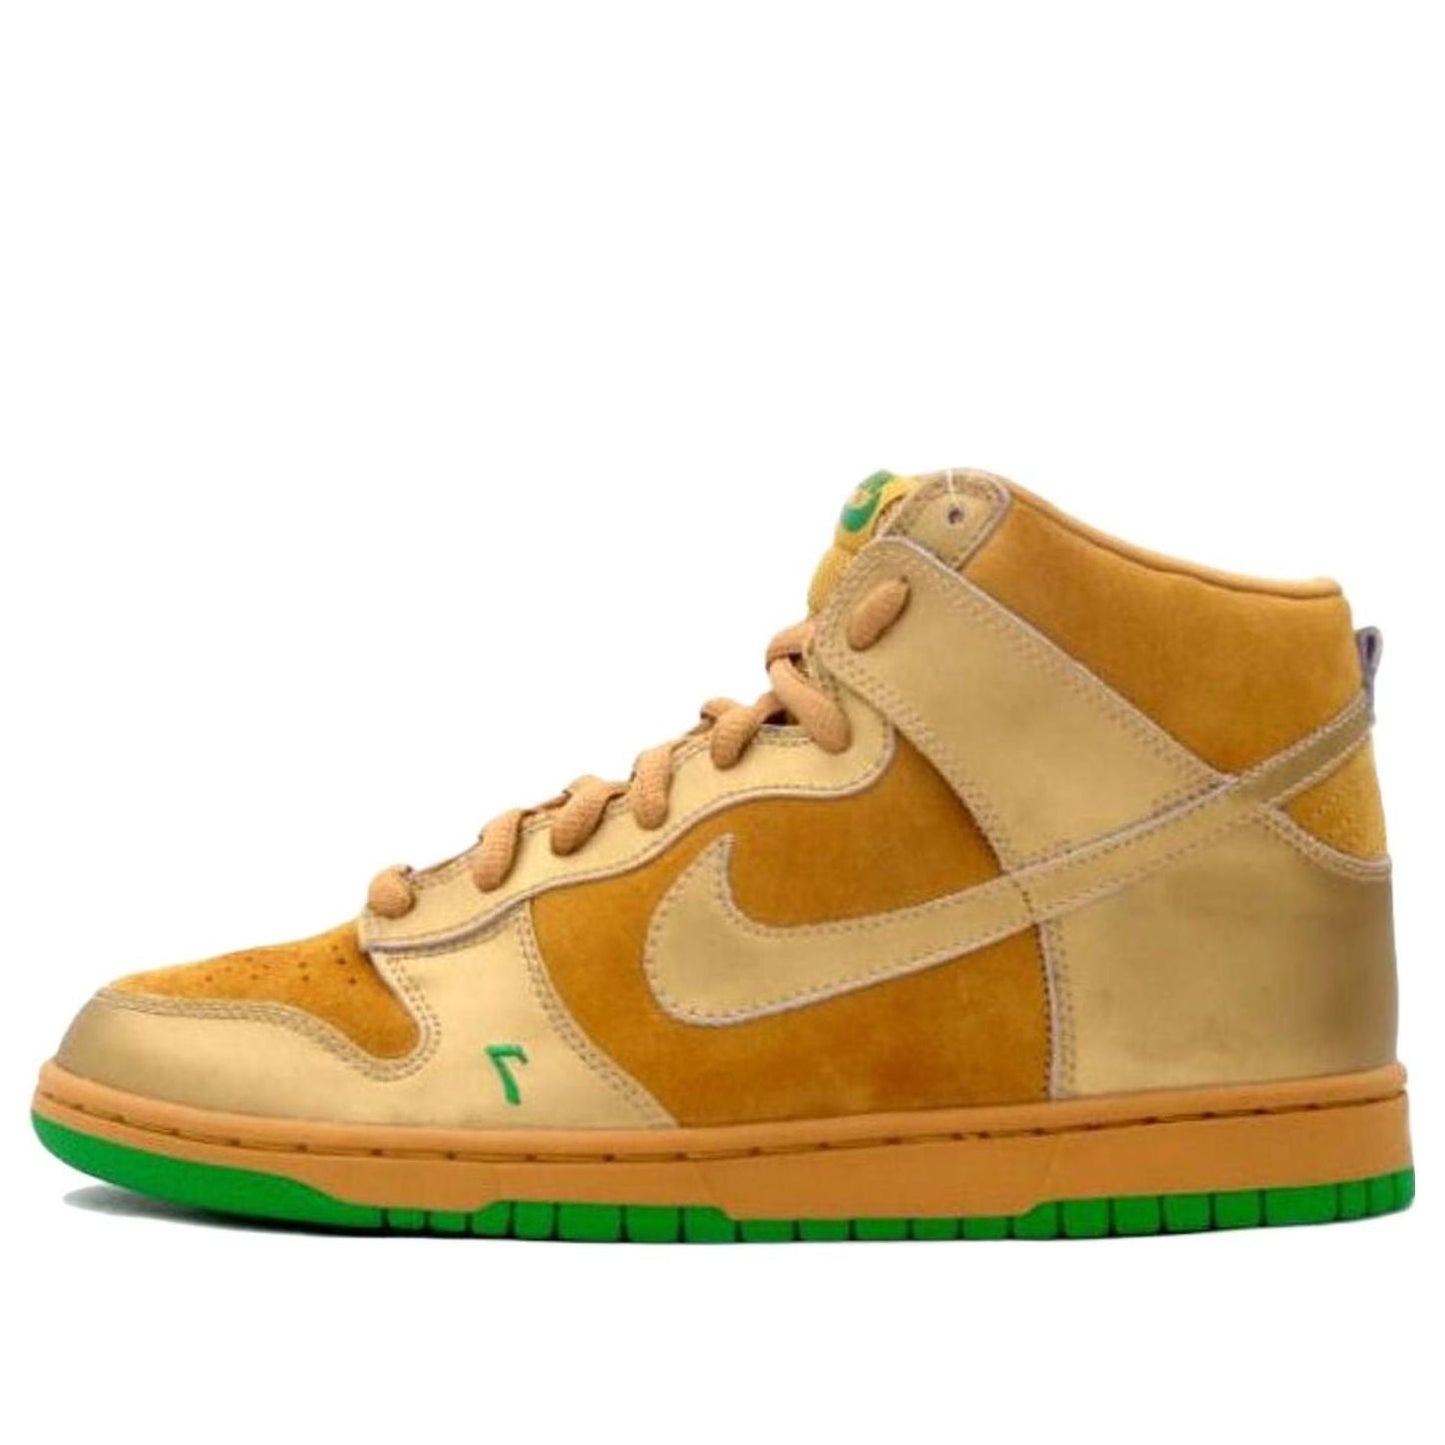 Nike Dunk High Pro SB 'Lucky'  305050-771 Antique Icons